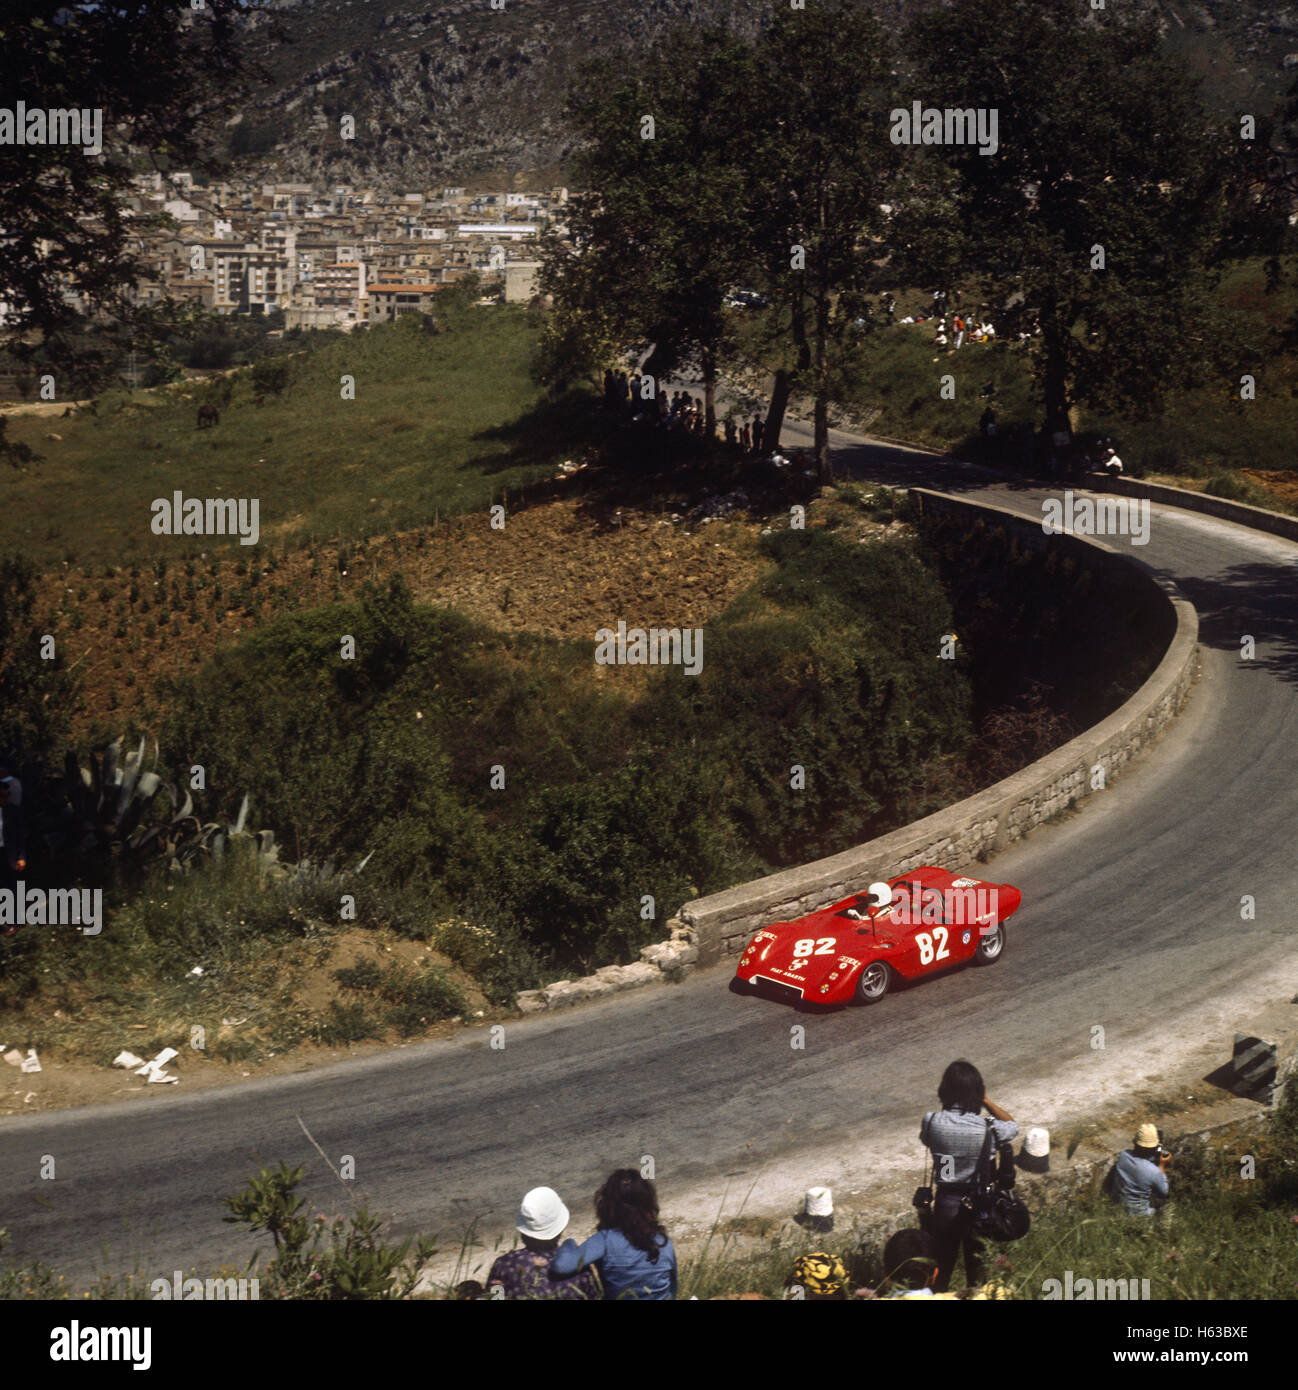 82 Maurizio Campanini and Mario Barone in an  Fiat Abarth 1000 SP finished 14th in the Targa Florio 16 May 1971 Stock Photo